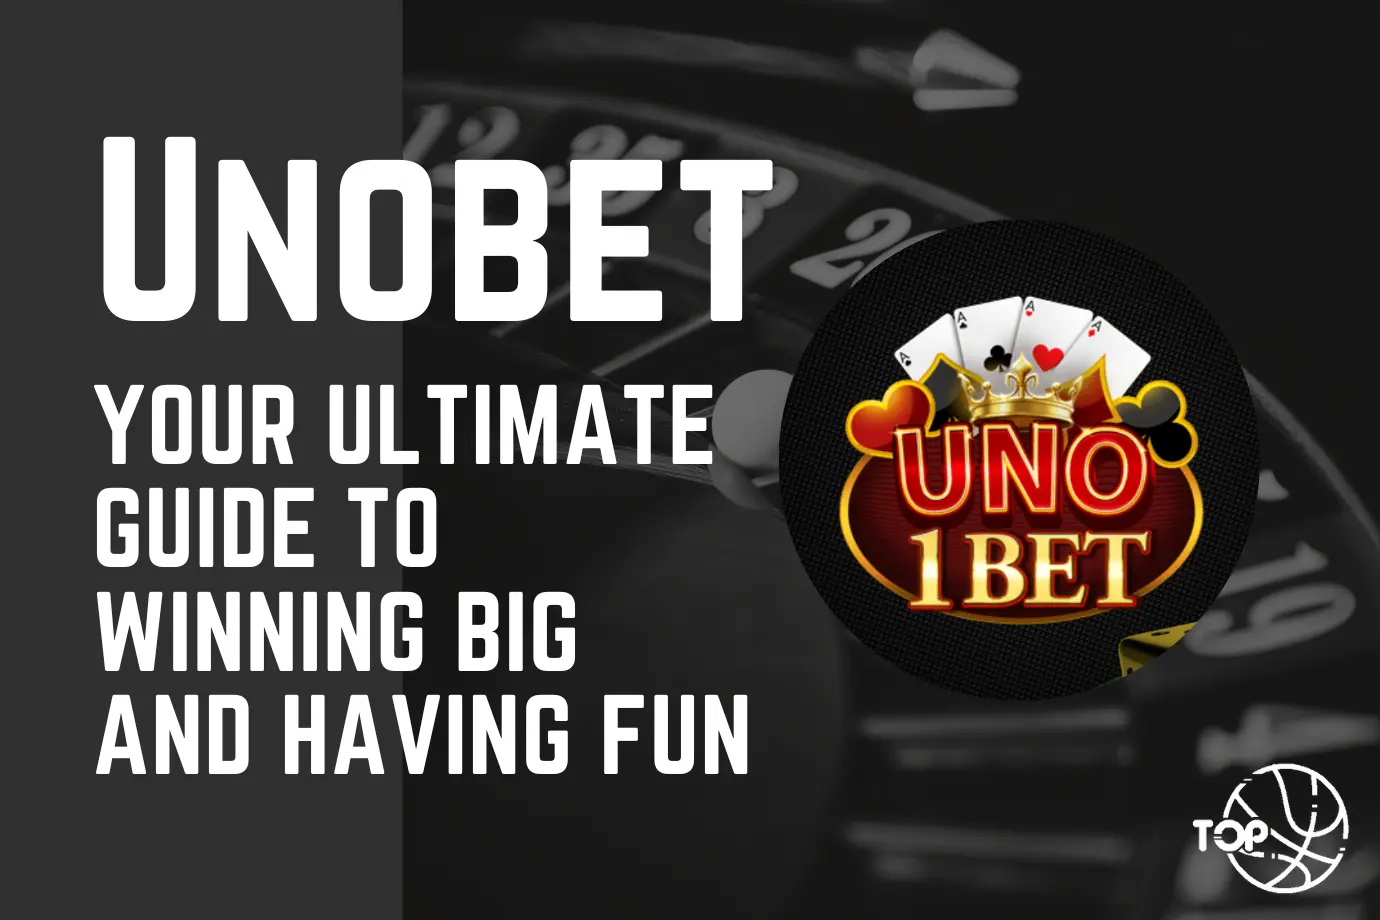 Unobet: Your Ultimate Guide to Winning Big and Having Fun